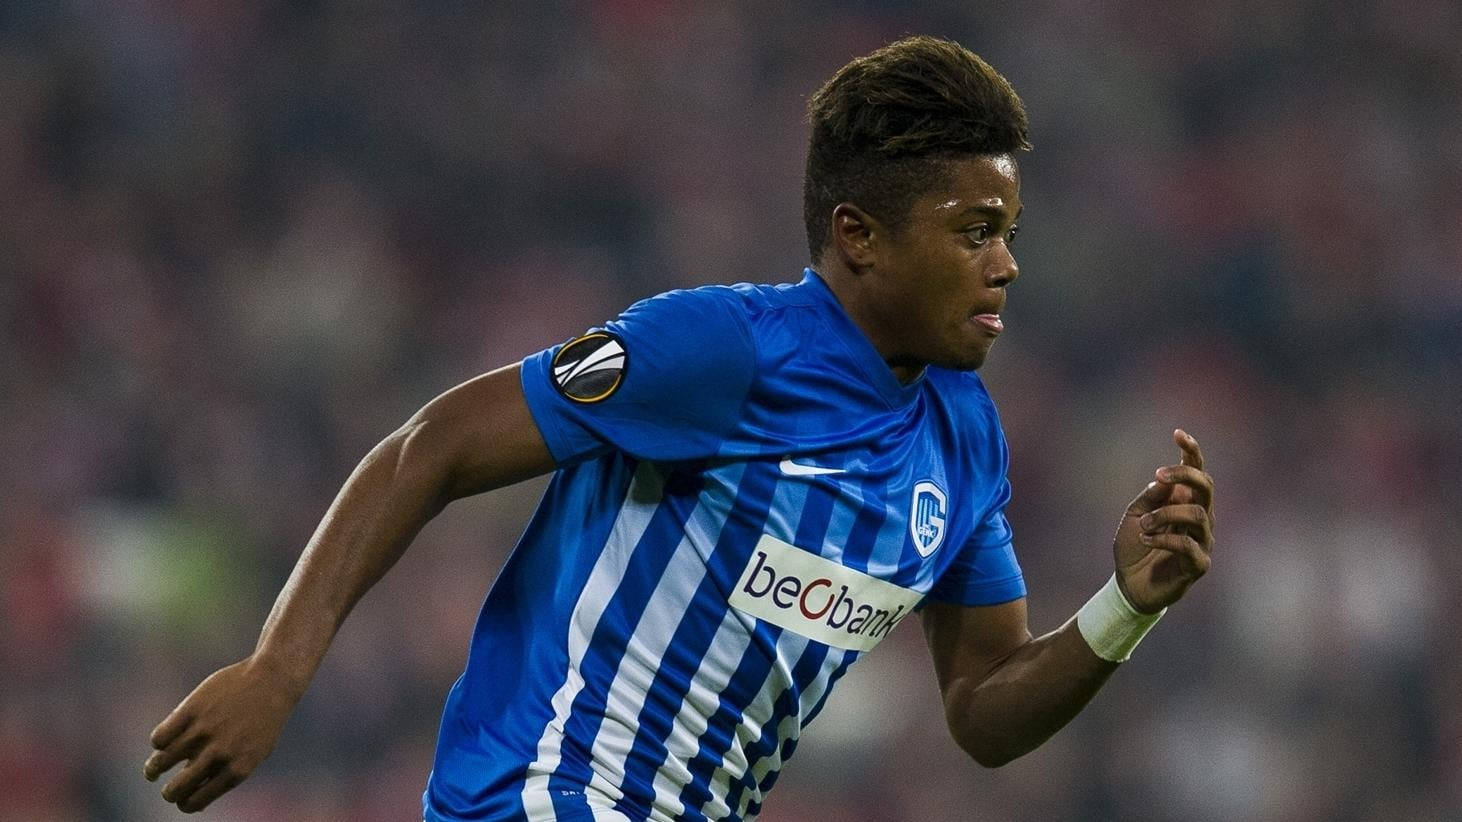 Striking pose of Leon Bailey, Professional Footballer, in a Blue Striped Jersey. Wallpaper